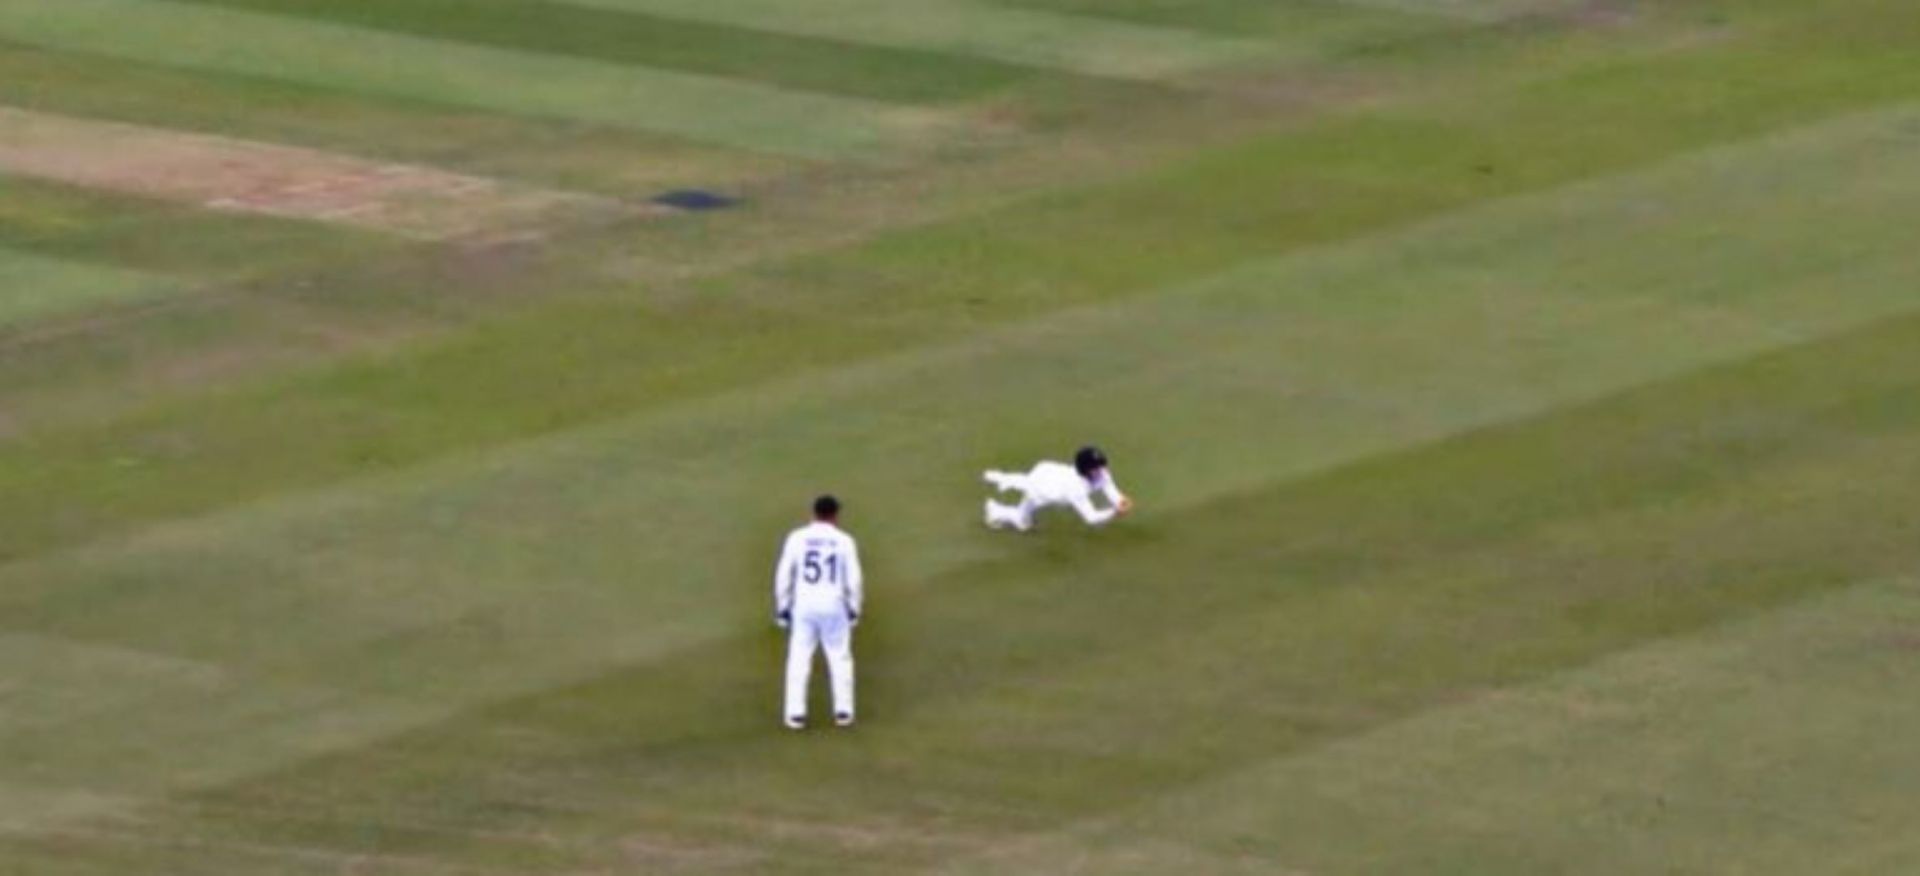 Harry Brook took the catch despite confusion with Jonny Bairstow